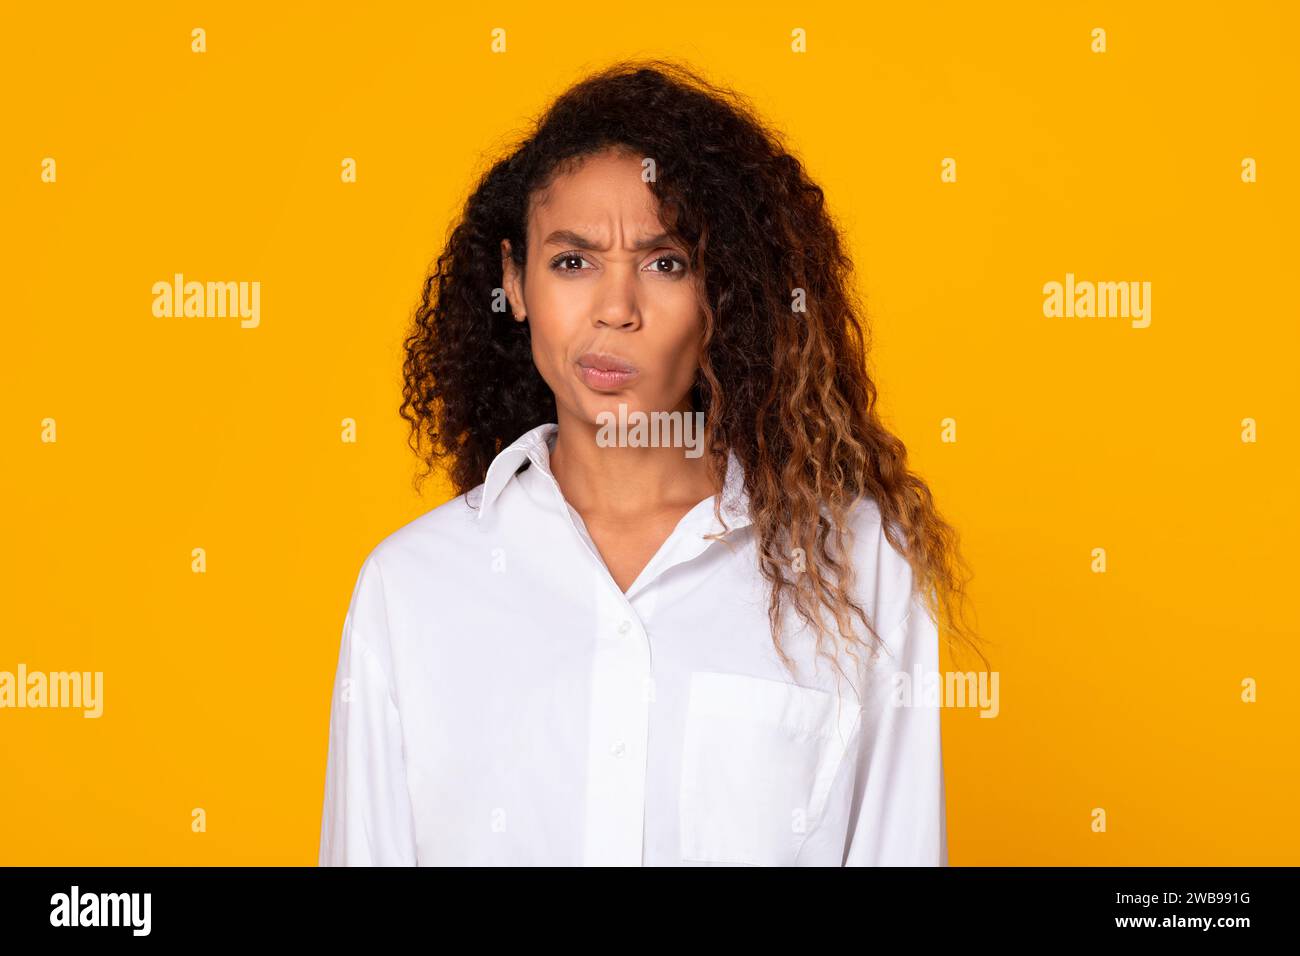 Black young lady frowning in confusion looking at camera, studio Stock Photo